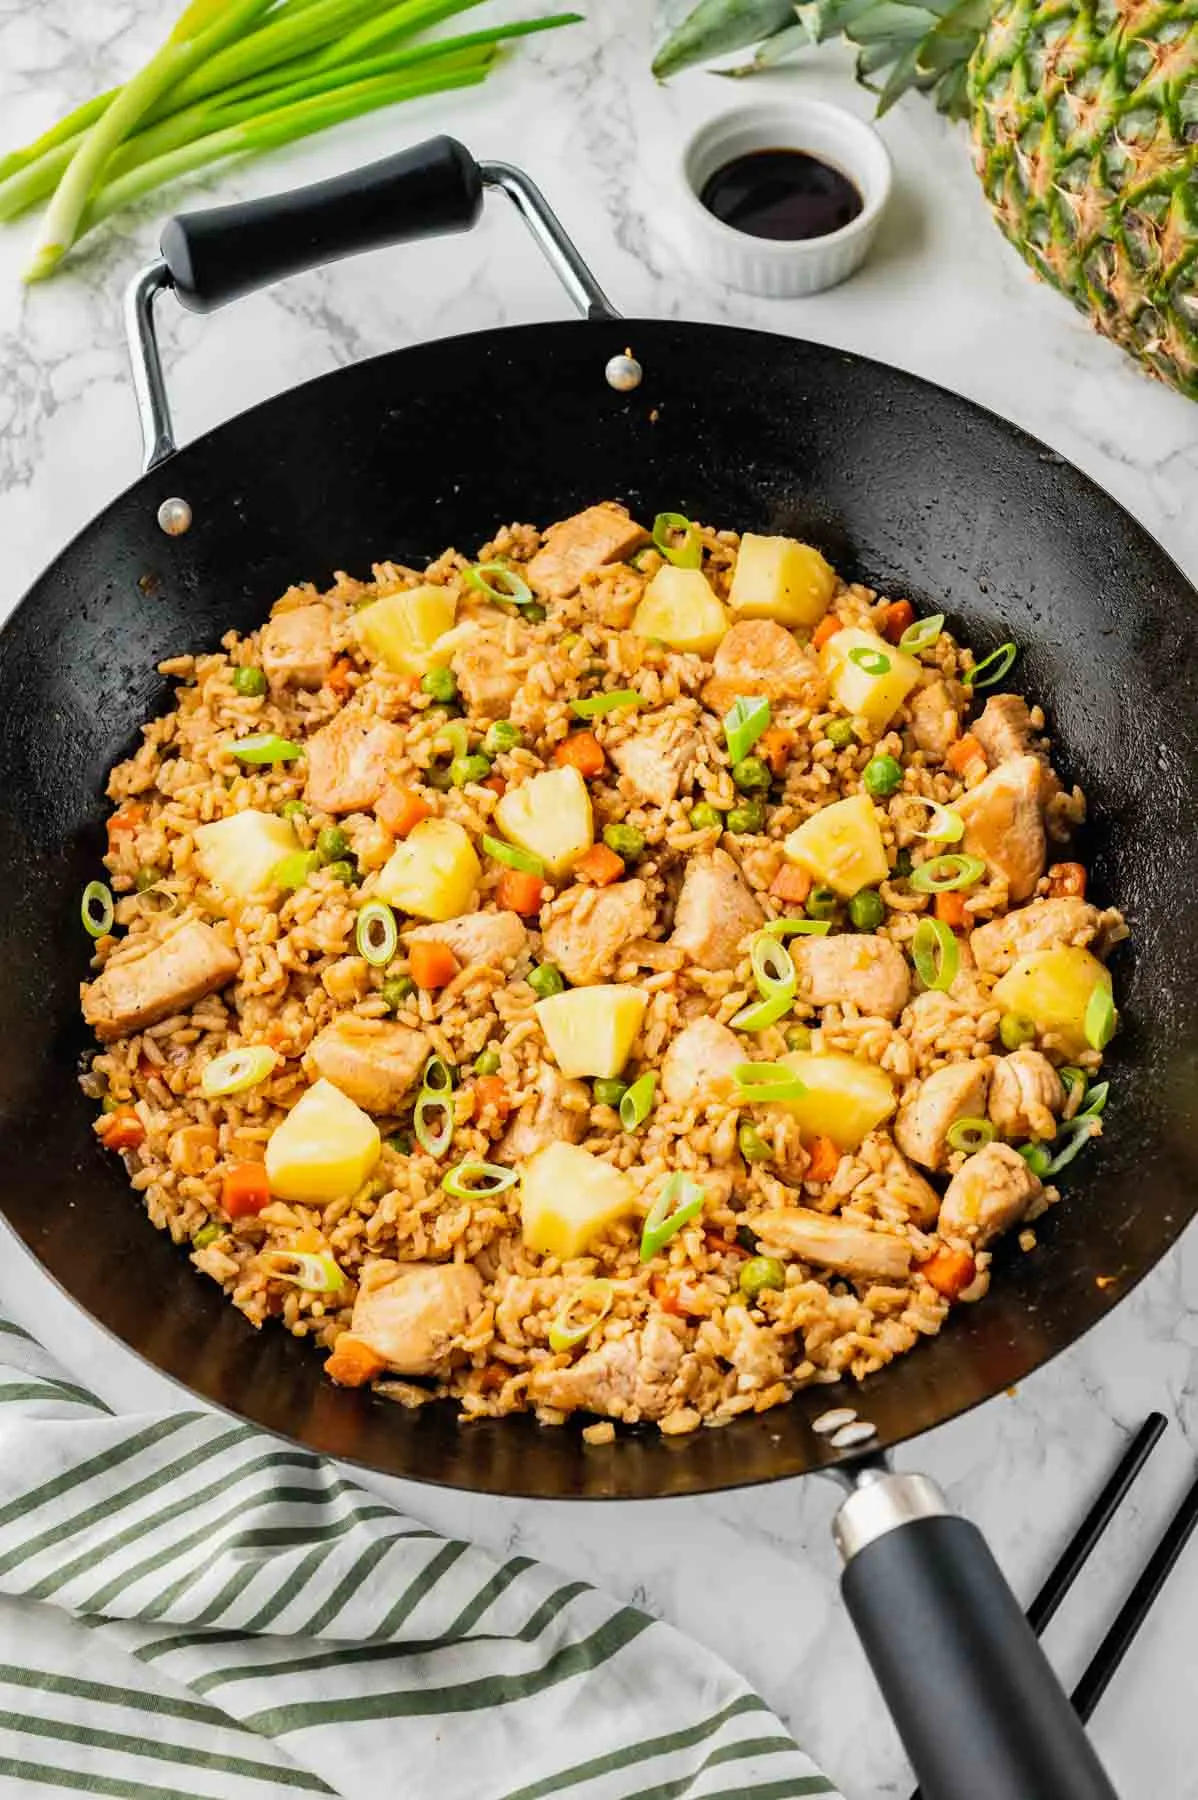 Pineapple Chicken Fried Rice is the perfect balance of sweet and savoury with pineapple chunks, diced chicken breast pieces and rice all seasoned with soy sauce, hoisin sauce and toasted sesame oil.